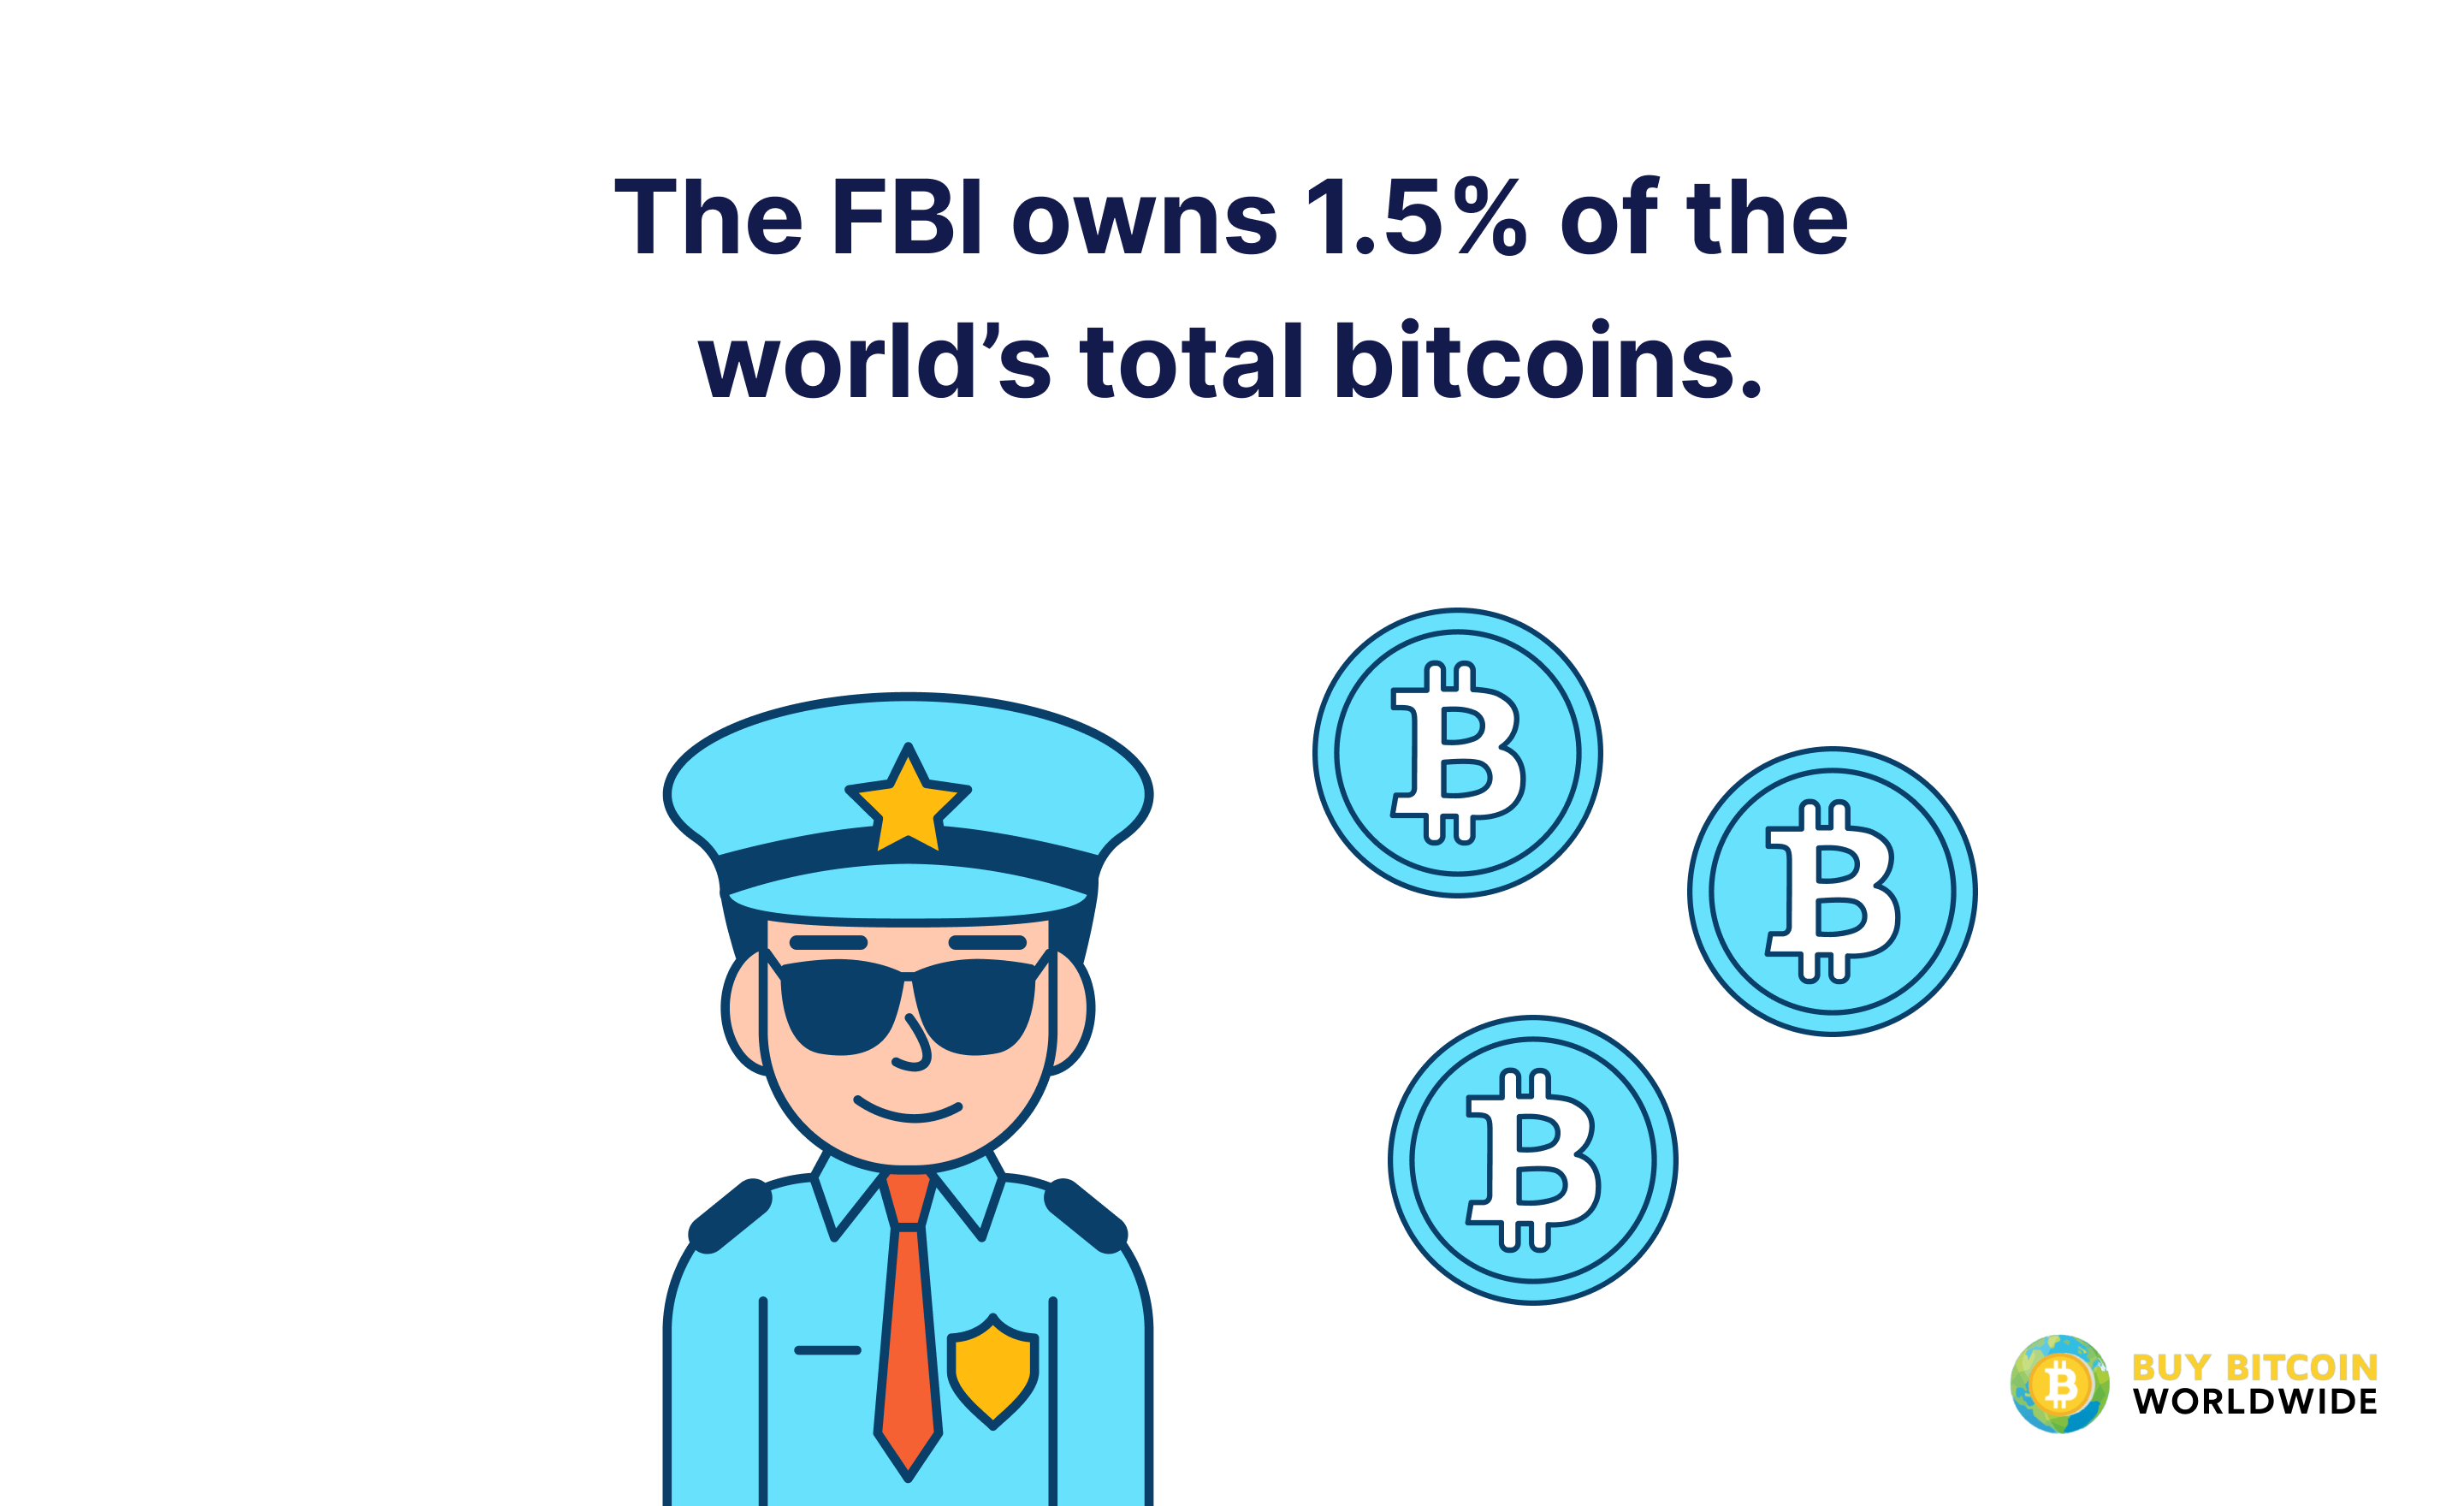 fbi owns 1.5% of the world's total bitcoins